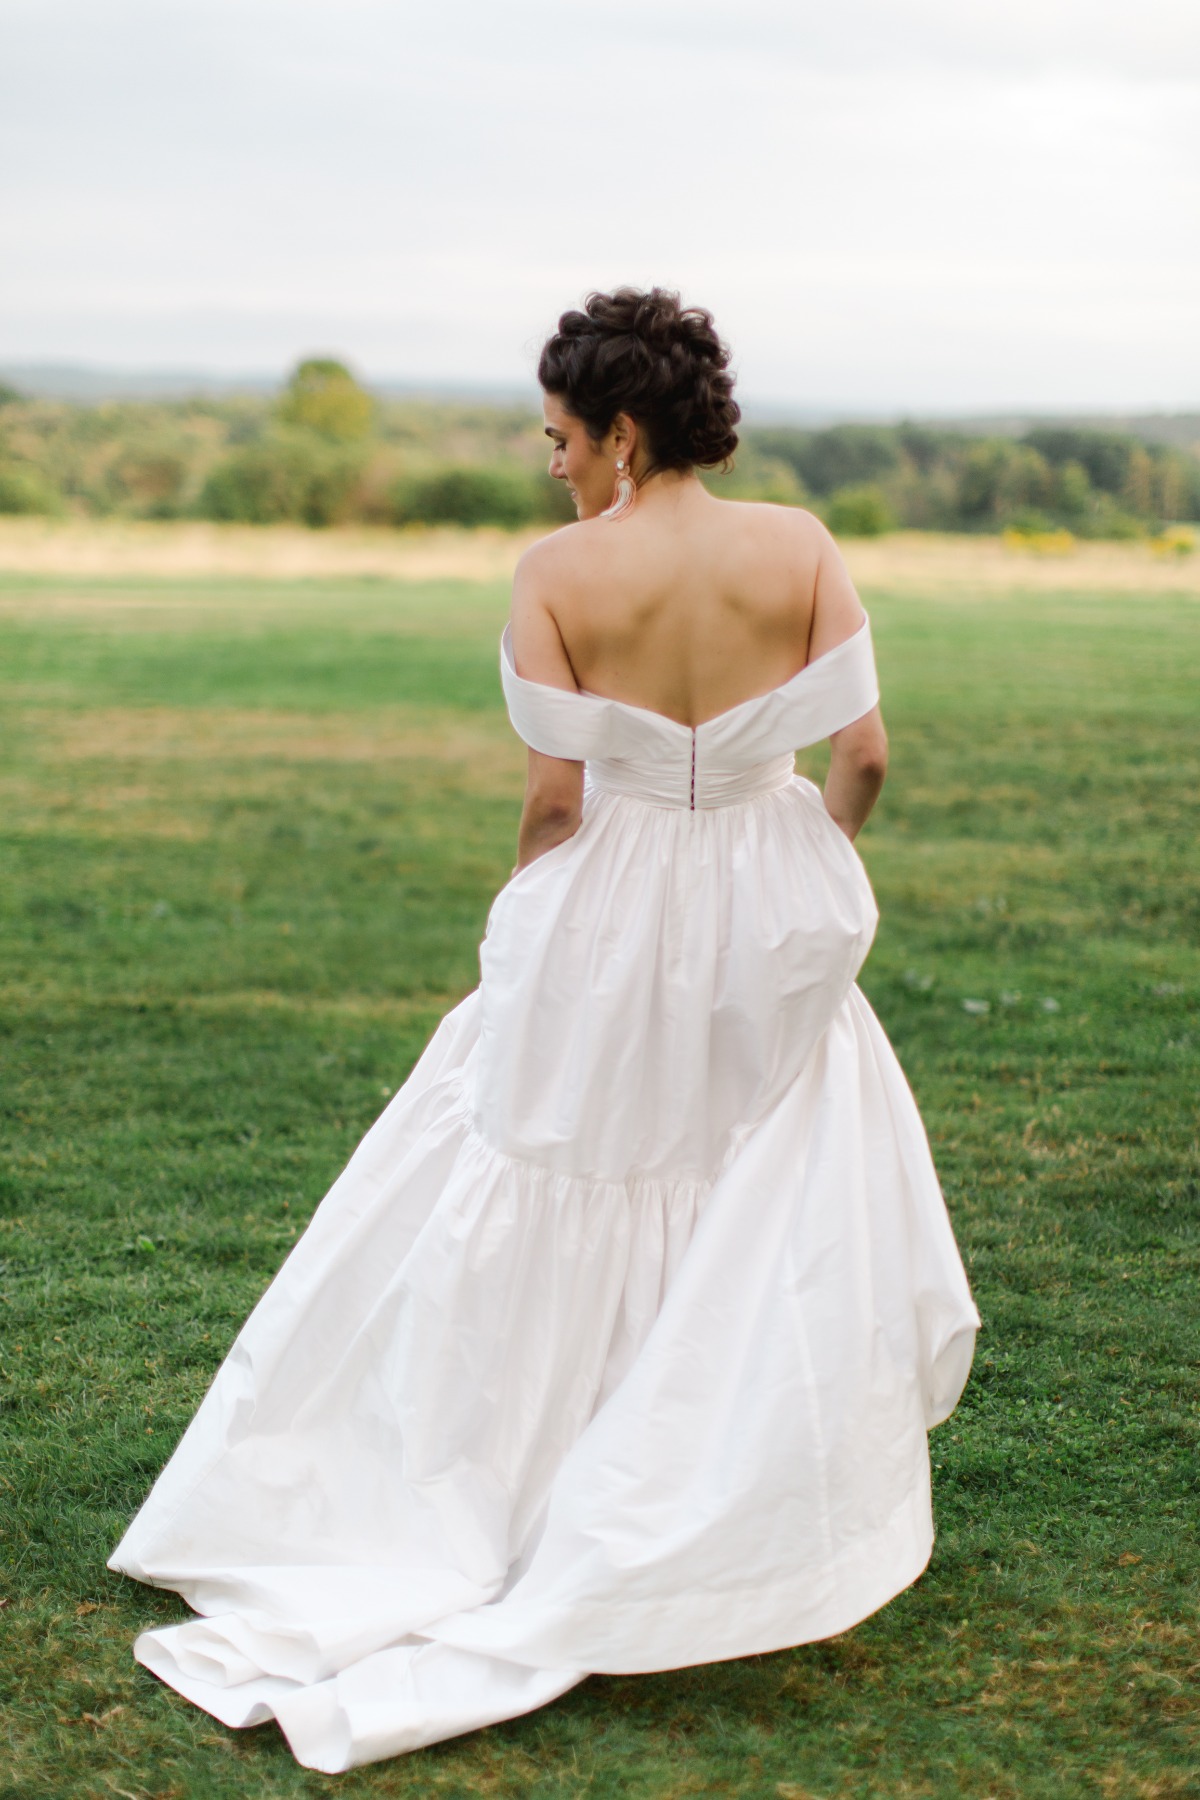 Portrait of the back of the bride's wedding dress walking away from camera in field